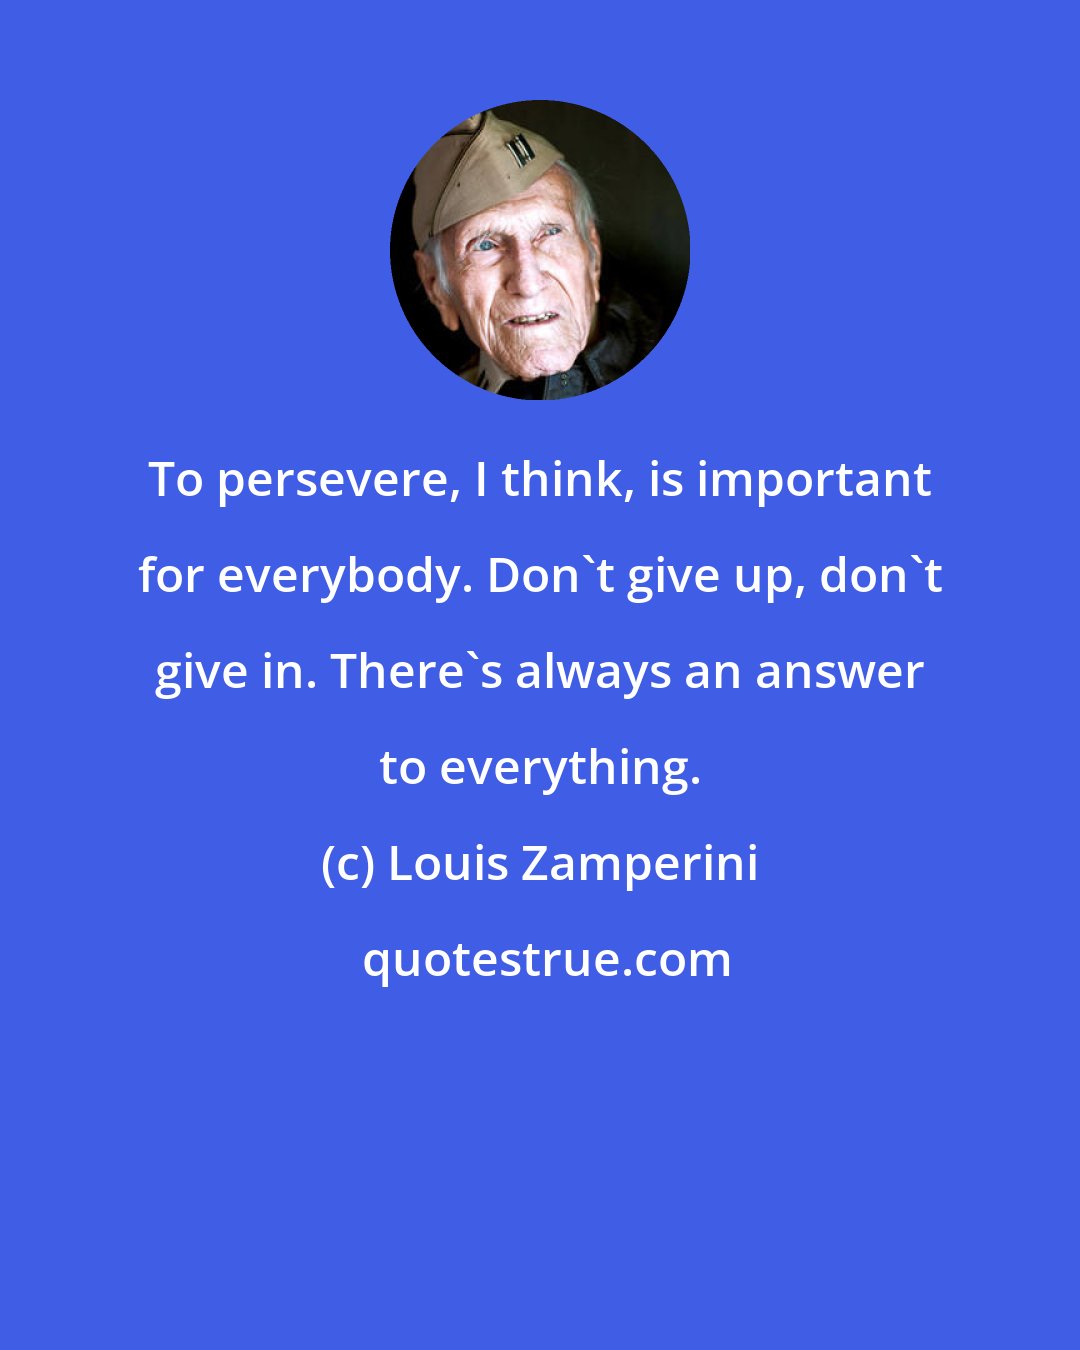 Louis Zamperini: To persevere, I think, is important for everybody. Don't give up, don't give in. There's always an answer to everything.